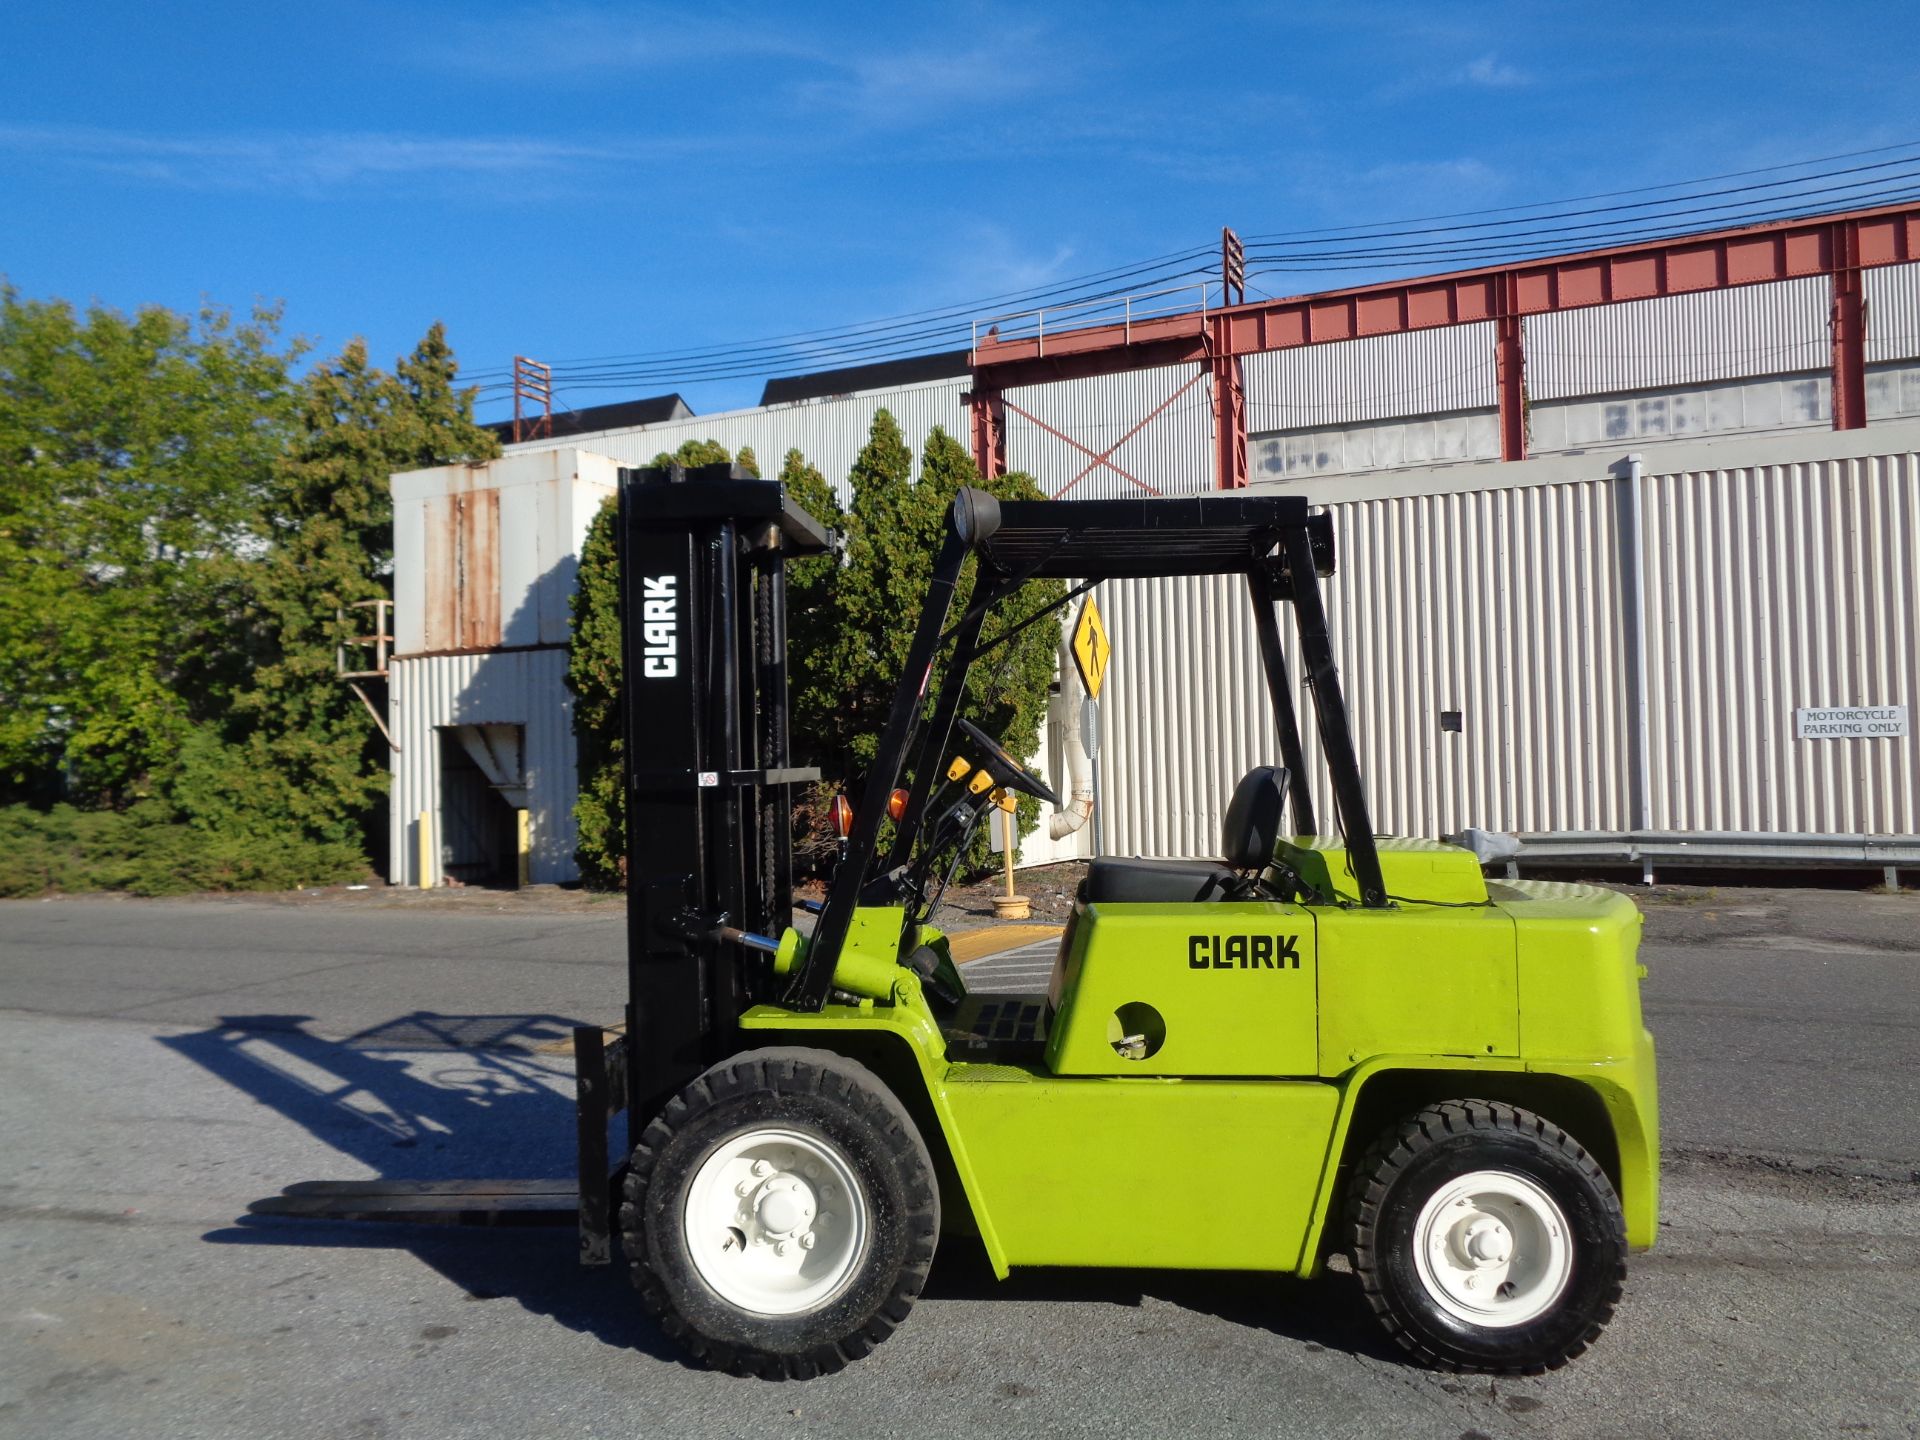 Clark C500-YS80 8,000 LBS Pneumatic Forklift - Image 3 of 11